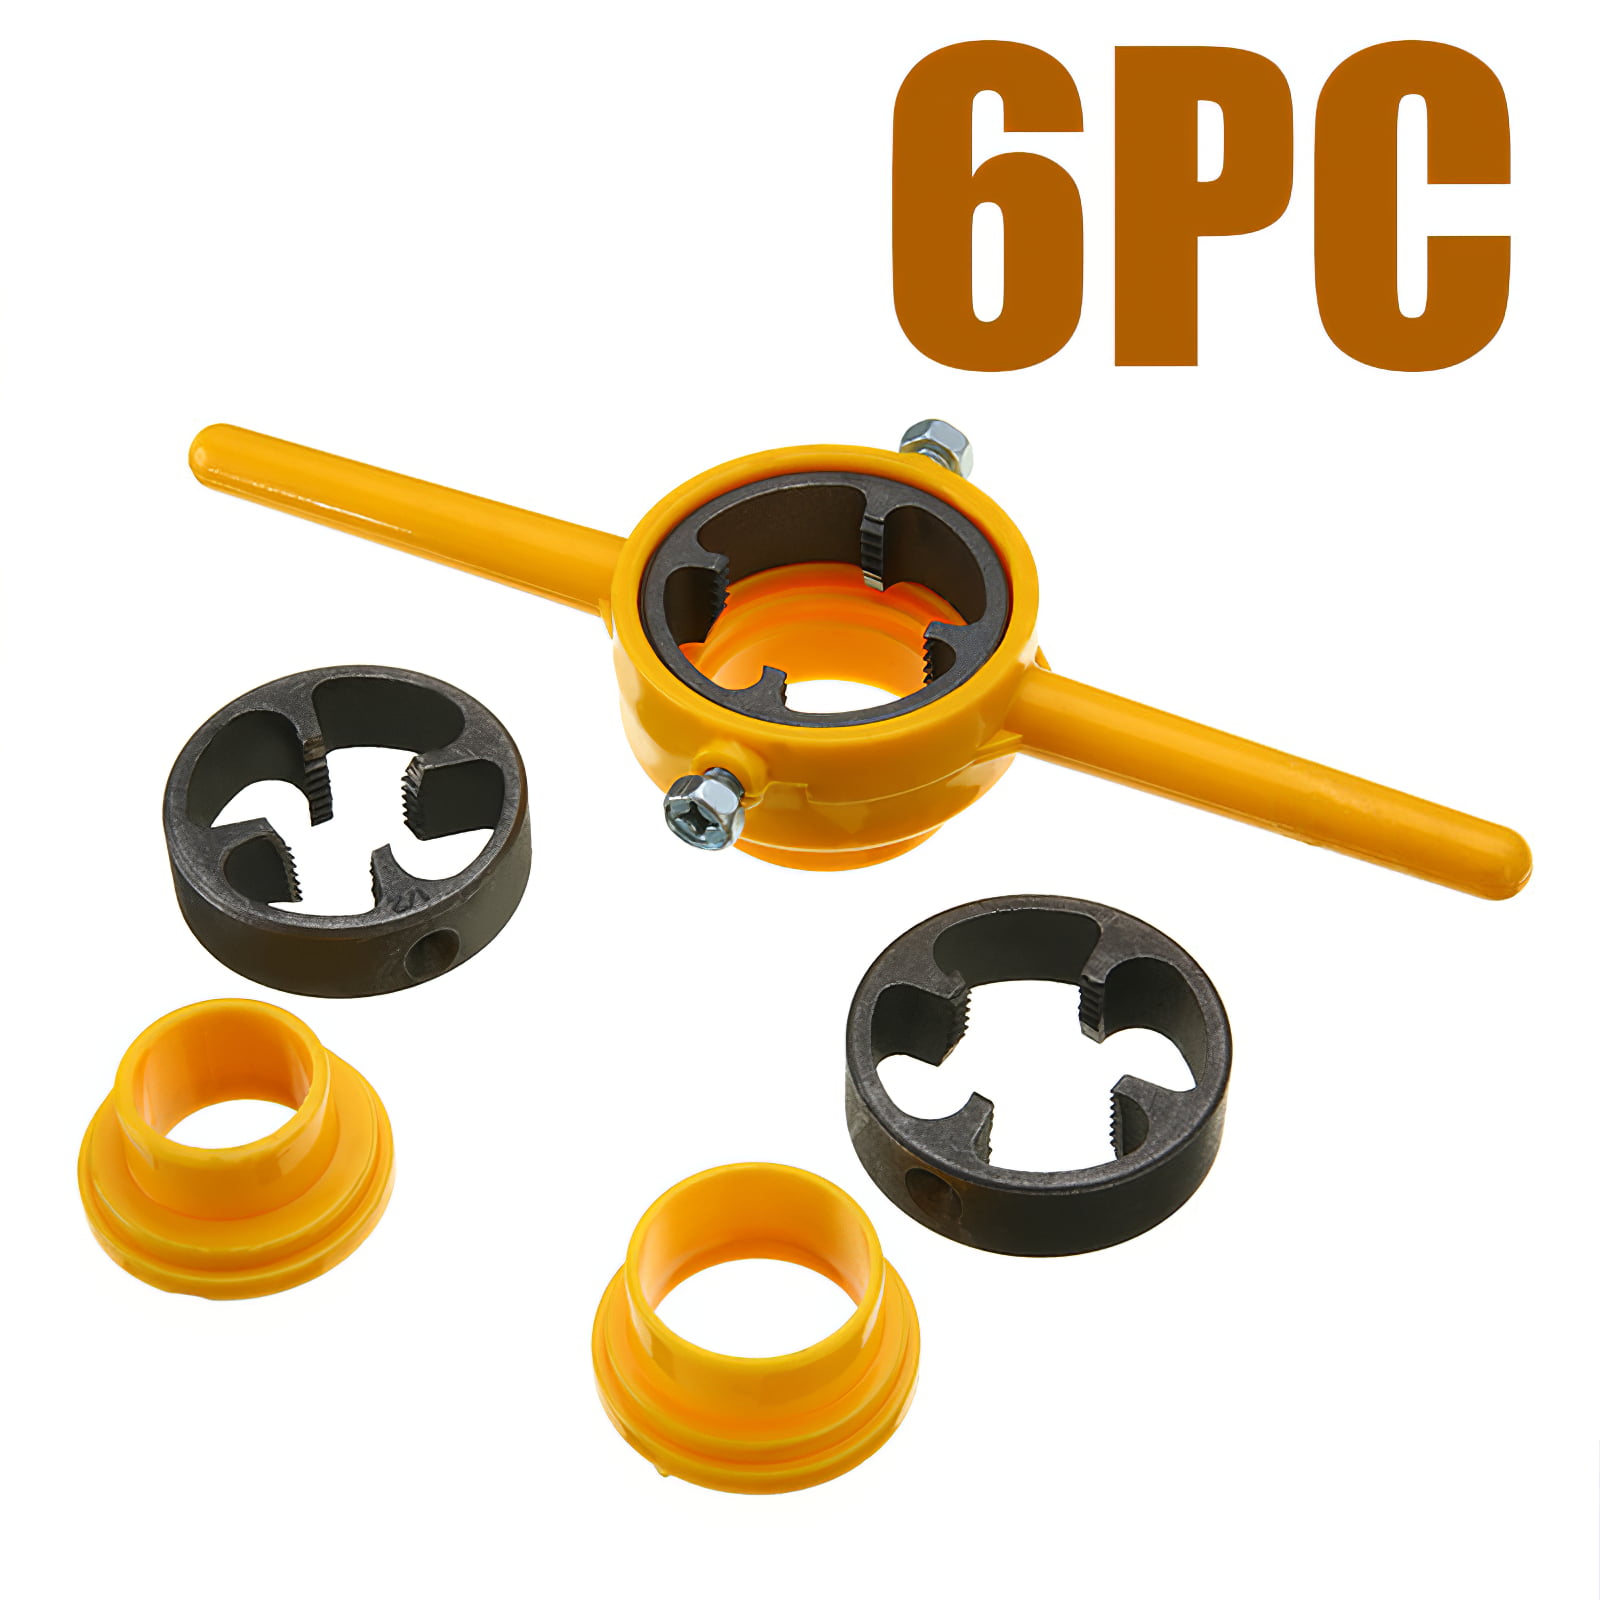 Details about   PVC Thread Tool Maker Pipe NPT Round Die Set Pipe Threader Plumbing Hand Tool 